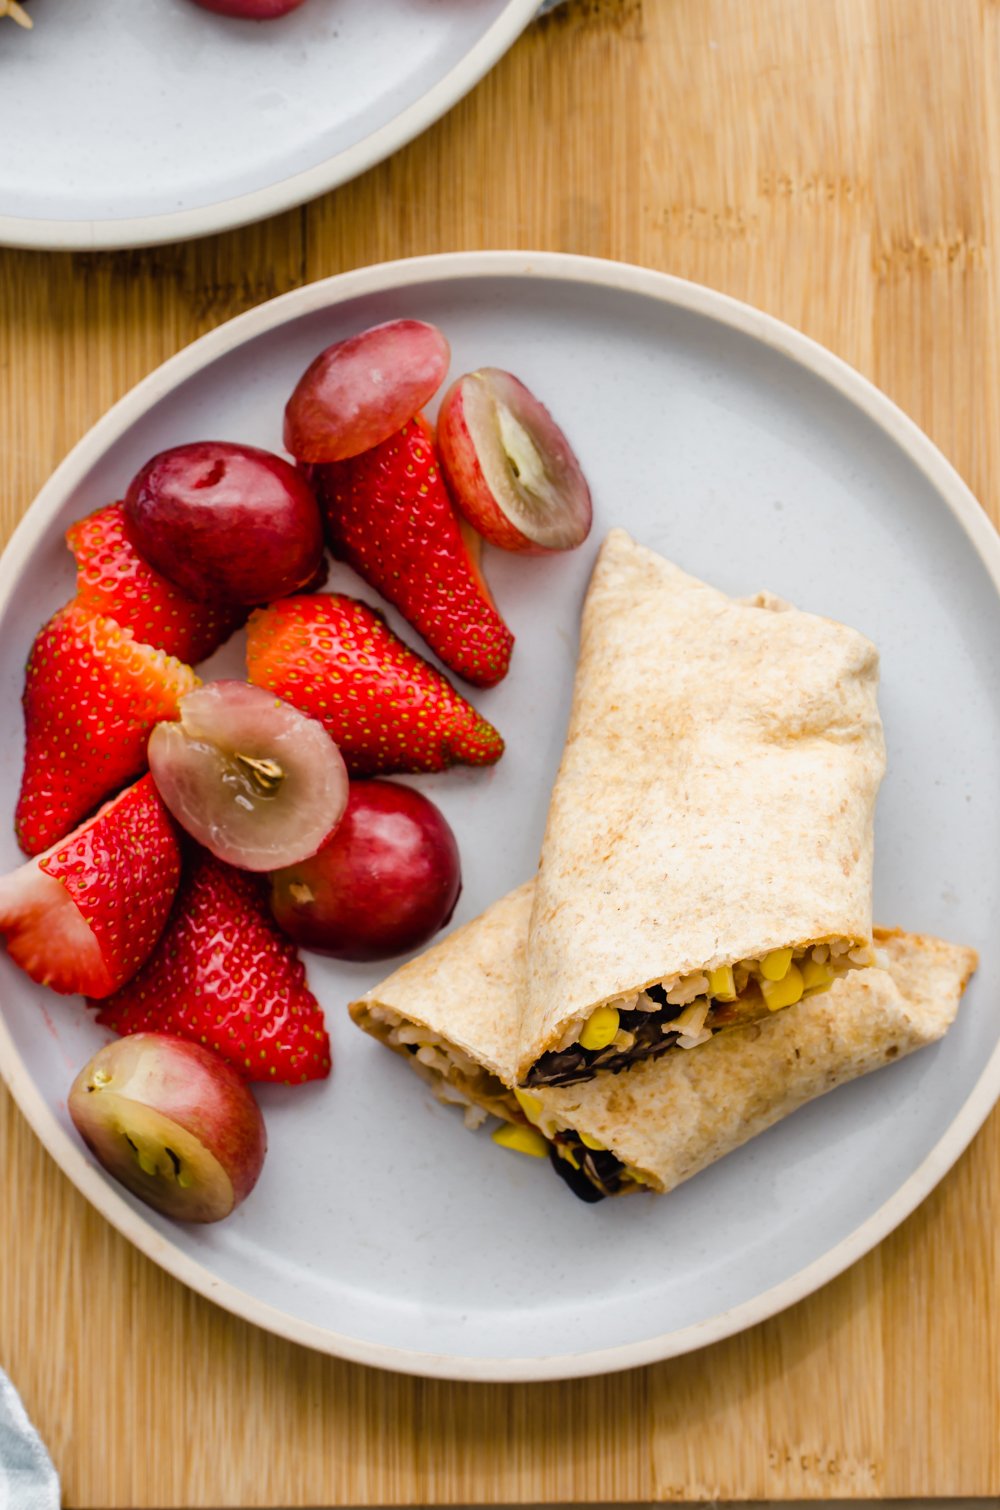 A lunch wrap cut in half with strawberries and grapes on a plate.